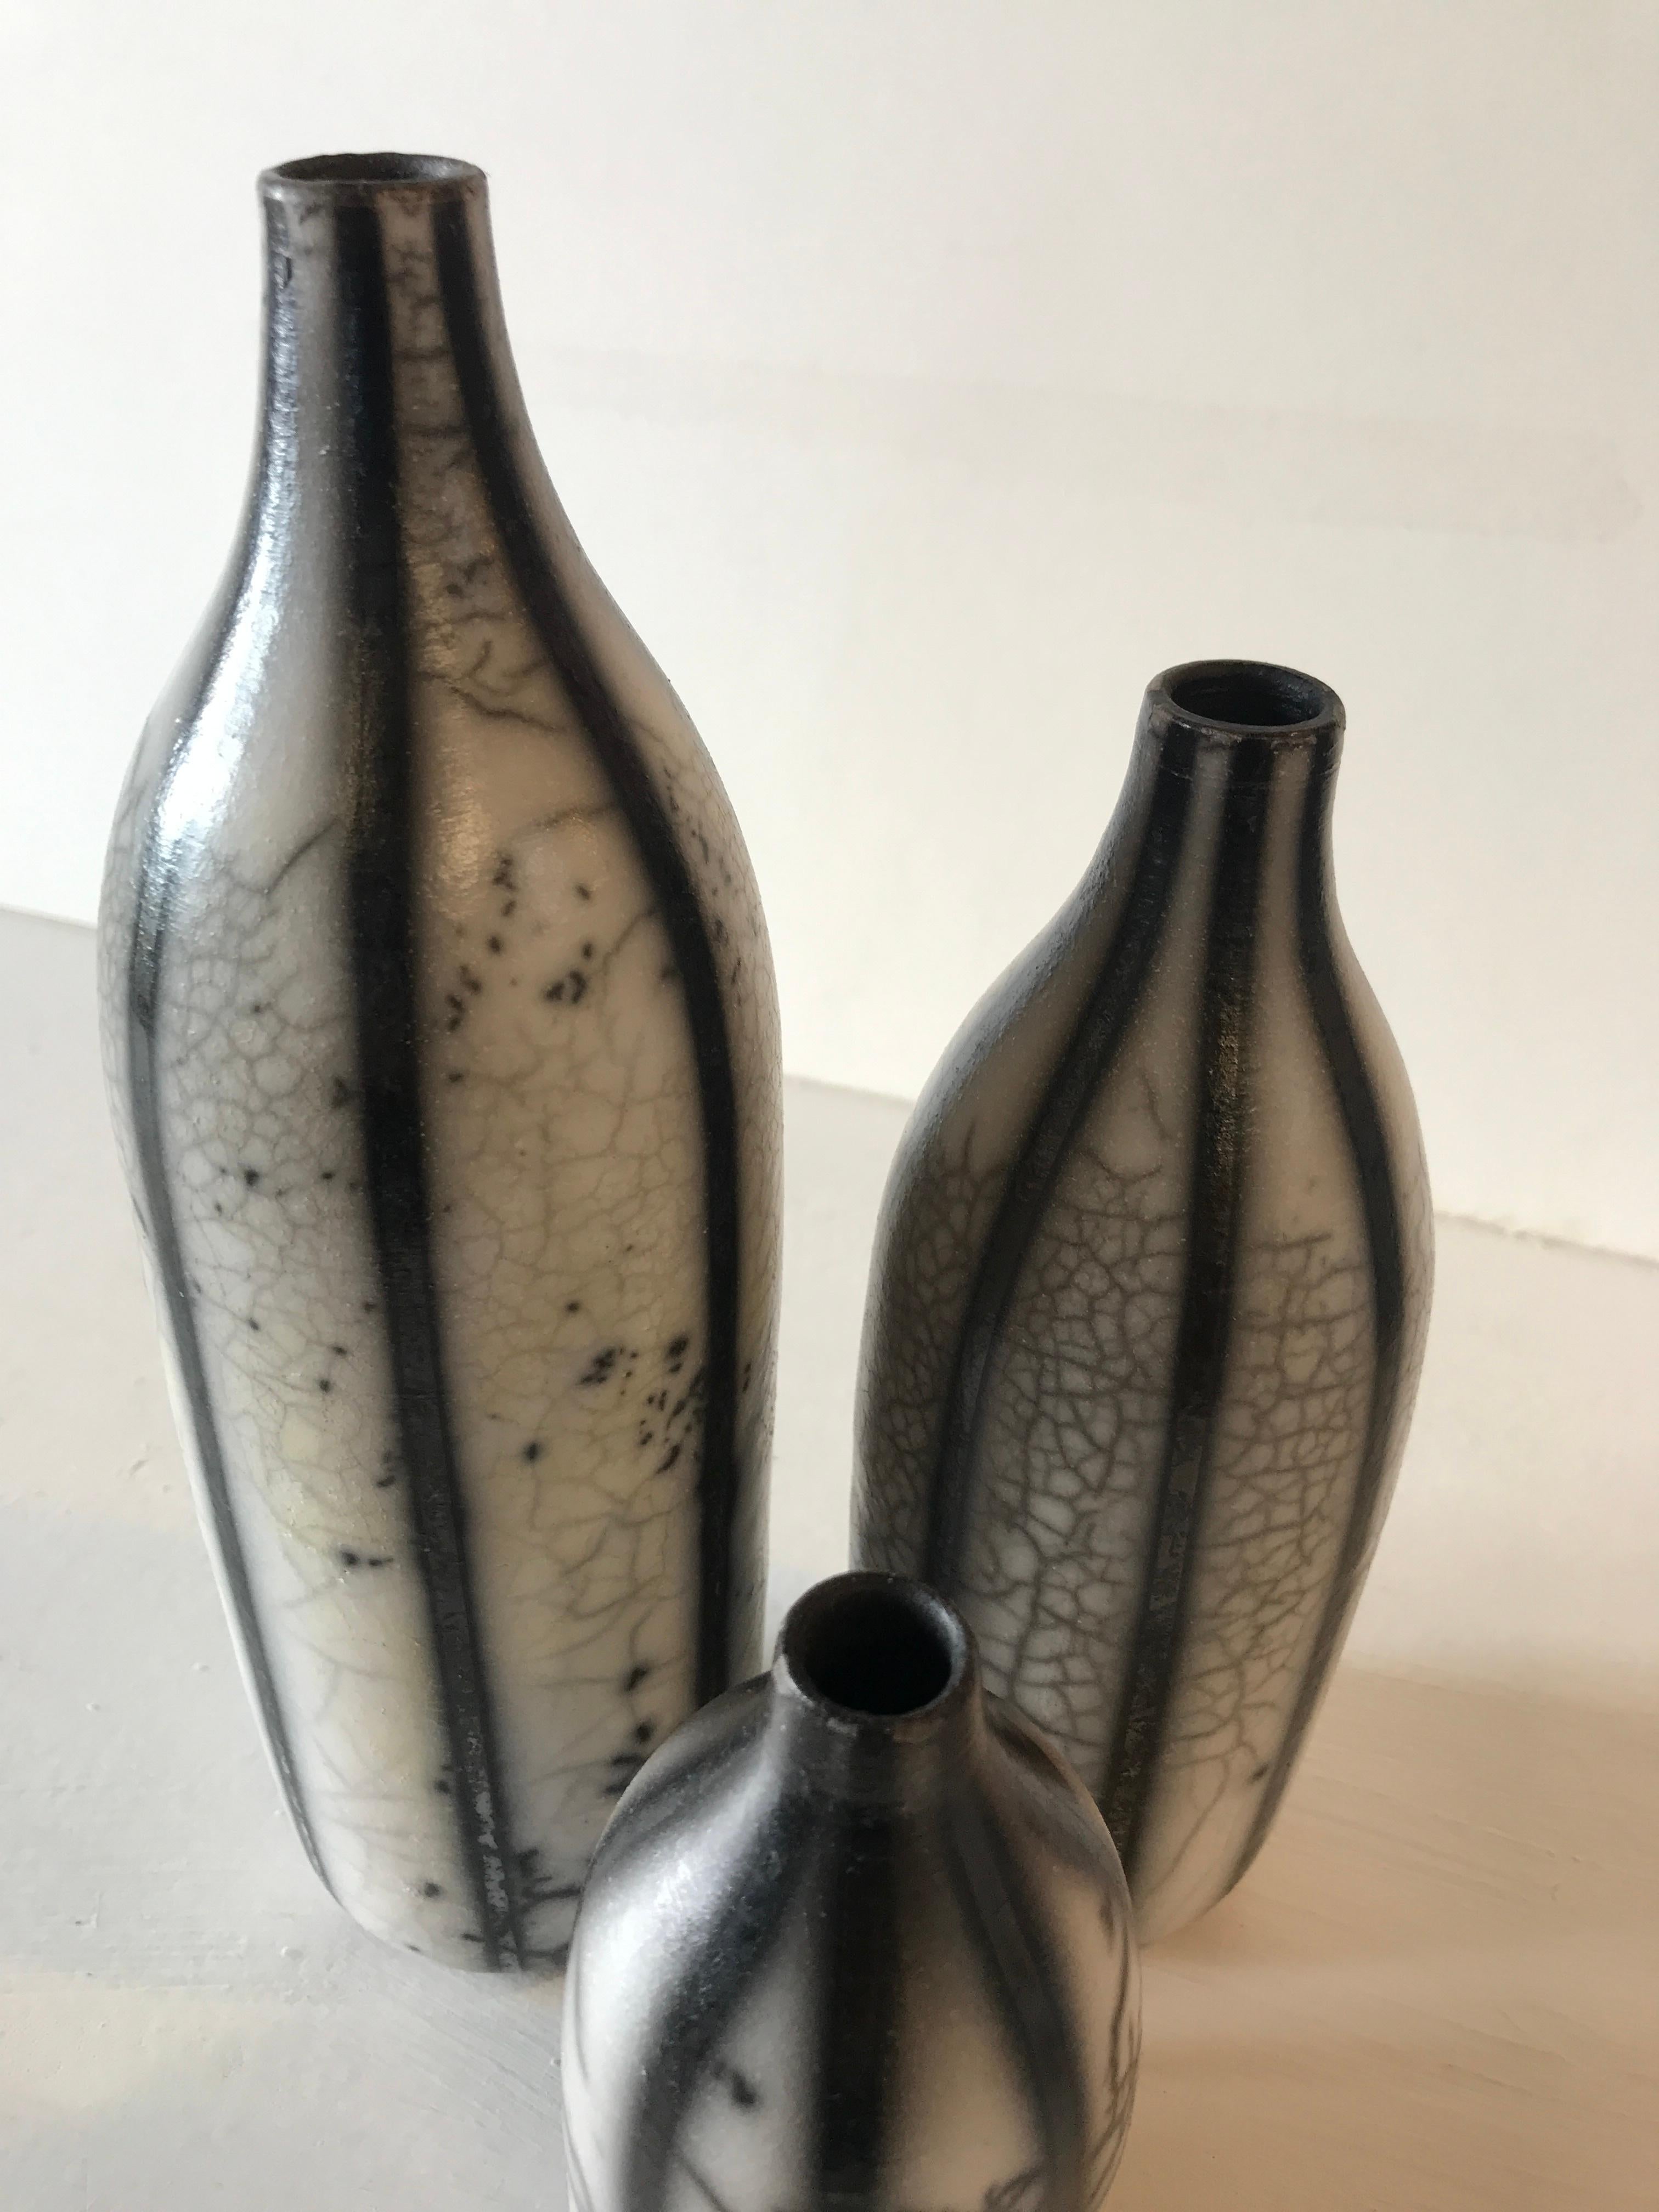 Three Raku Striped Bottles by Tamsin Levene.

Three raku striped bottles. Set contains small bottle, medium bottle, and large bottle. 

ADDITIONAL INFORMATION:

Ceramic on Stone
22.5 H x 9 W cm (8.86 x 3.54 in)
Sold as a set of three

SIZES:
Large: